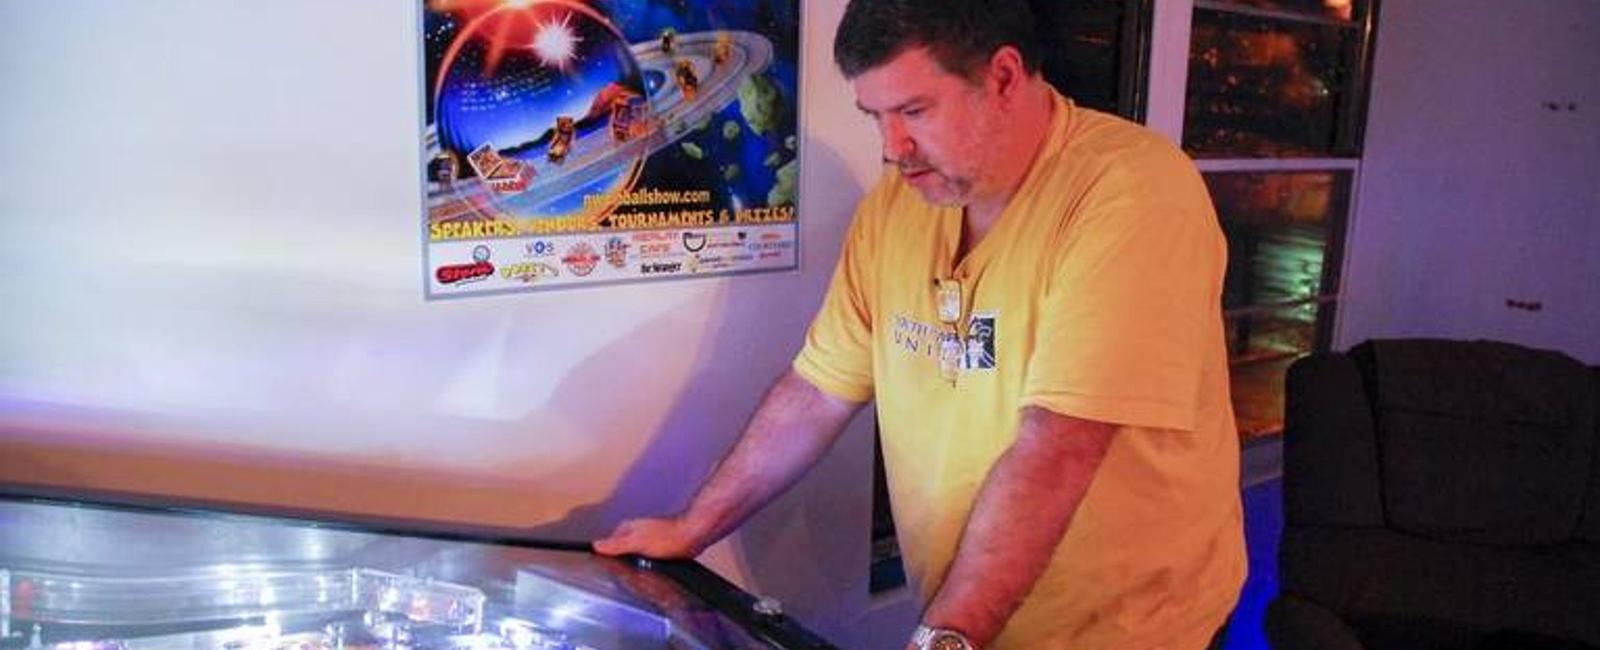 Minors people under 18 years old in south carolina are not allowed to play pinball